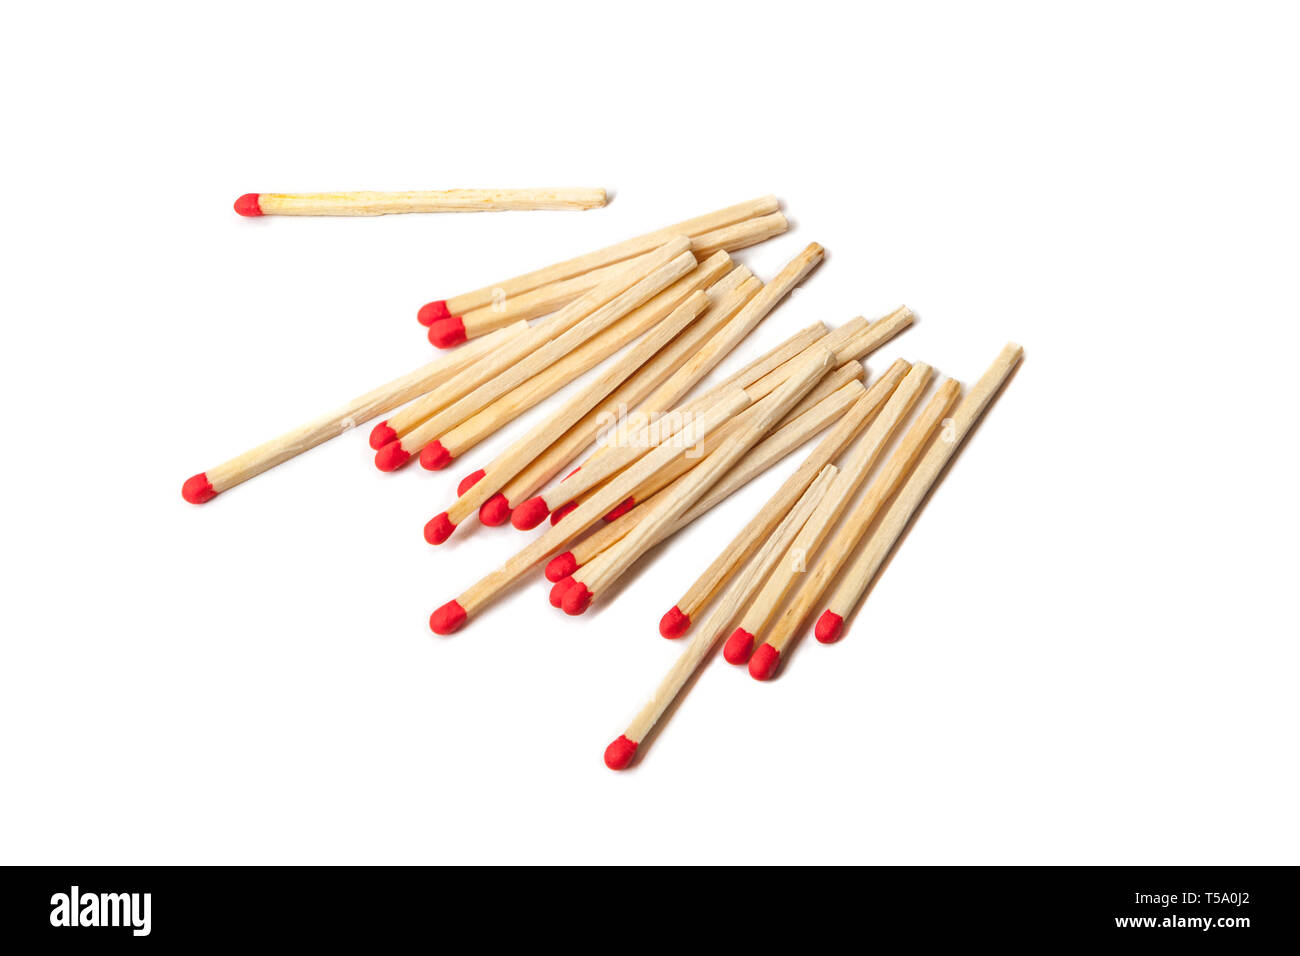 A lot of matches isolated on white background Stock Photo